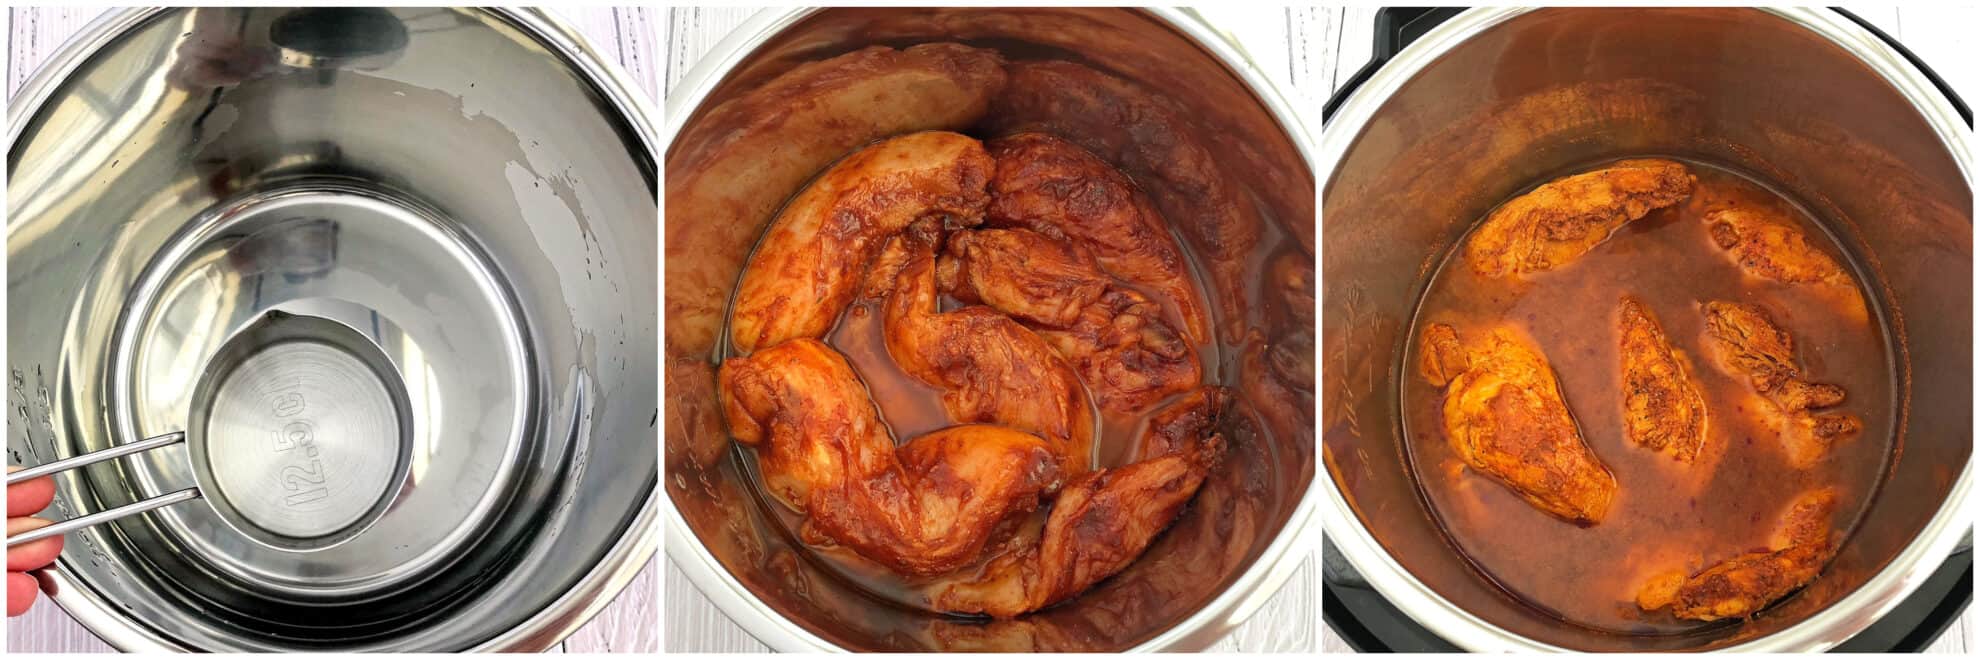 BBQ Pulled Chicken, BBQ Pulled Chicken Sandwich, delicious, easy dinner, Easy Instant Pot Pulled BBQ Chicken Recipe, homegrown cucumbers, Insta-pot, Instant Pot dish, kid-approved dinner, kid-friendly dinner, organic avocado, organic chicken breast, organic leaf lettuce, quick and easy recipe